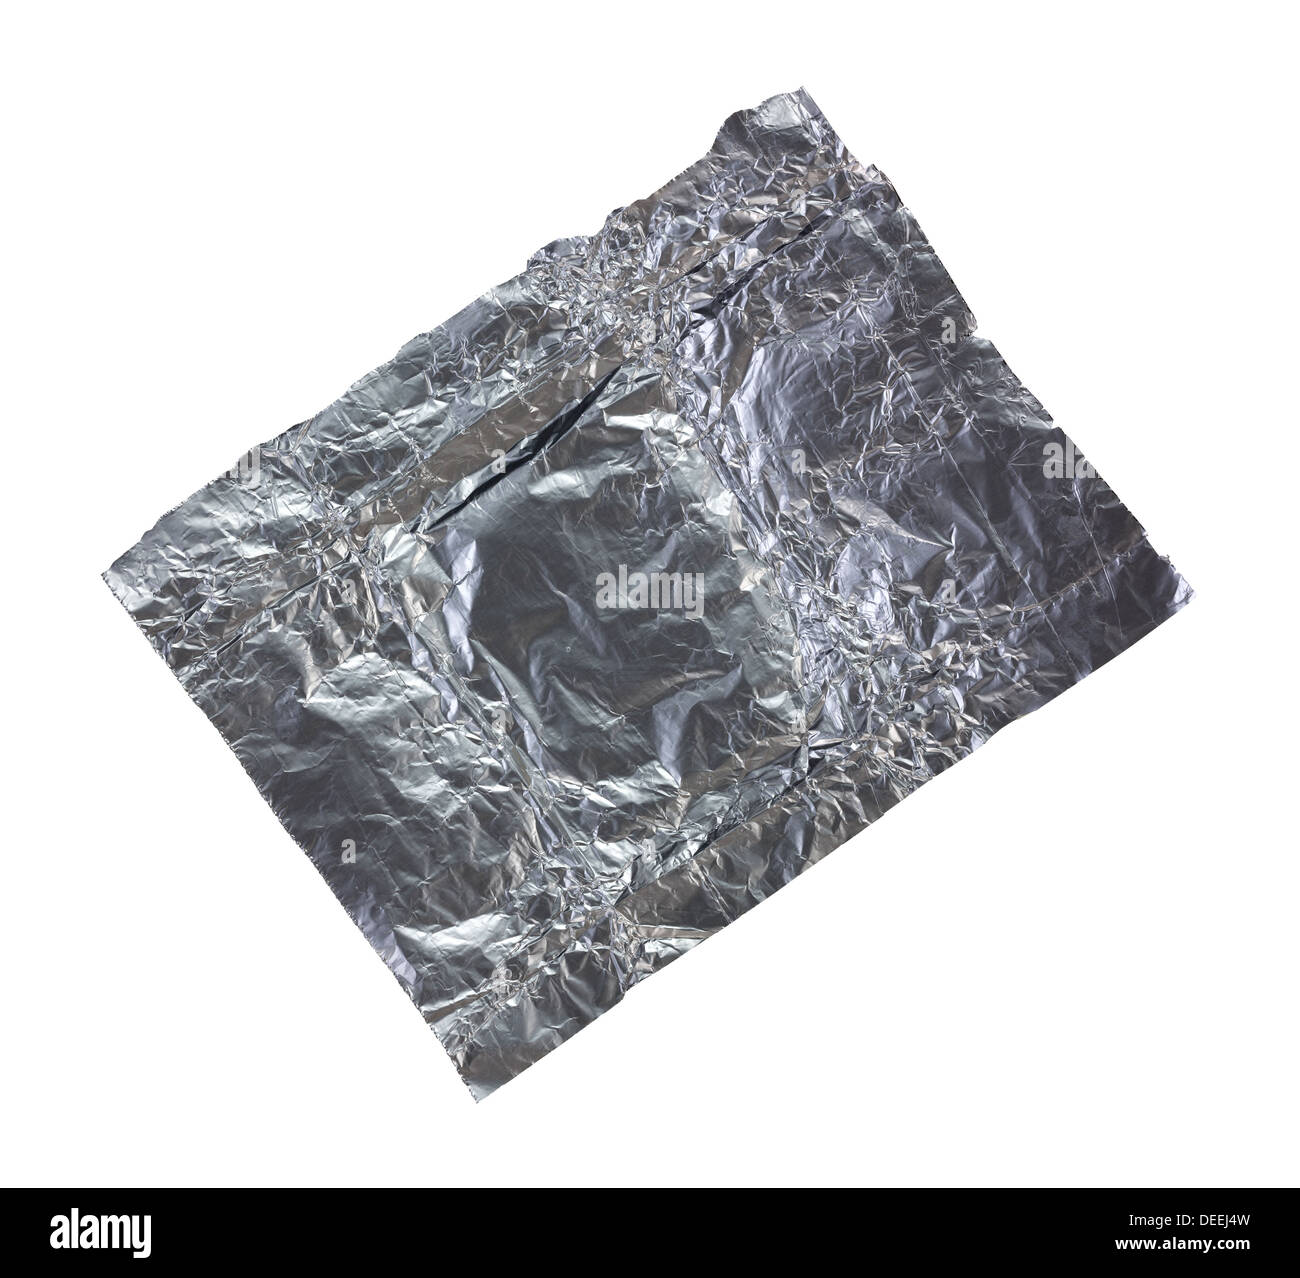 A small scrap of used tin foil on a white background. Stock Photo